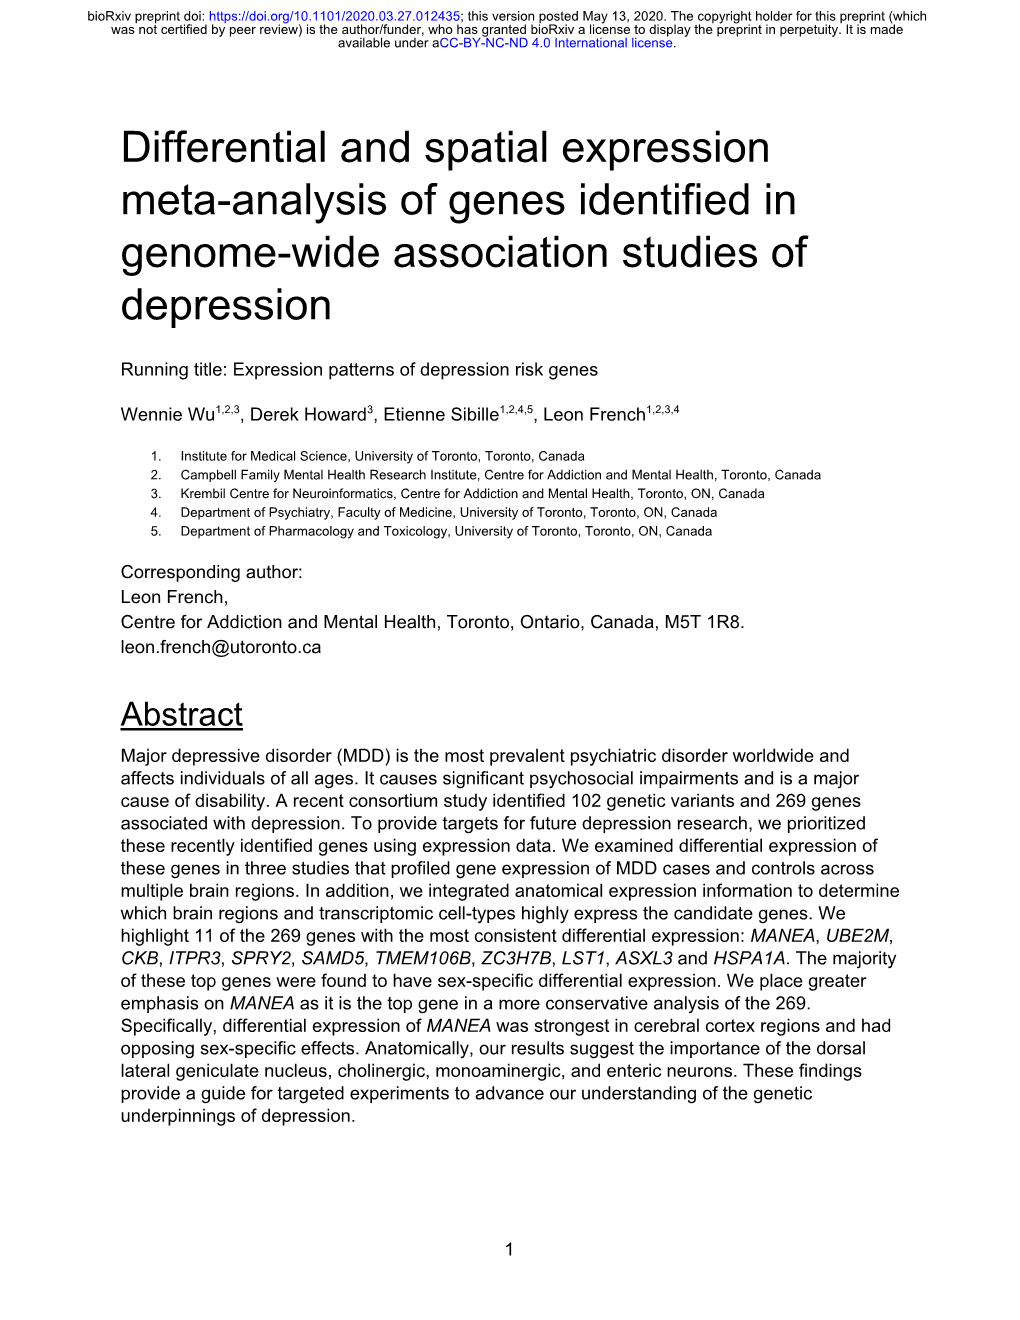 Differential and Spatial Expression Meta-Analysis of Genes Identified in Genome-Wide Association Studies of Depression